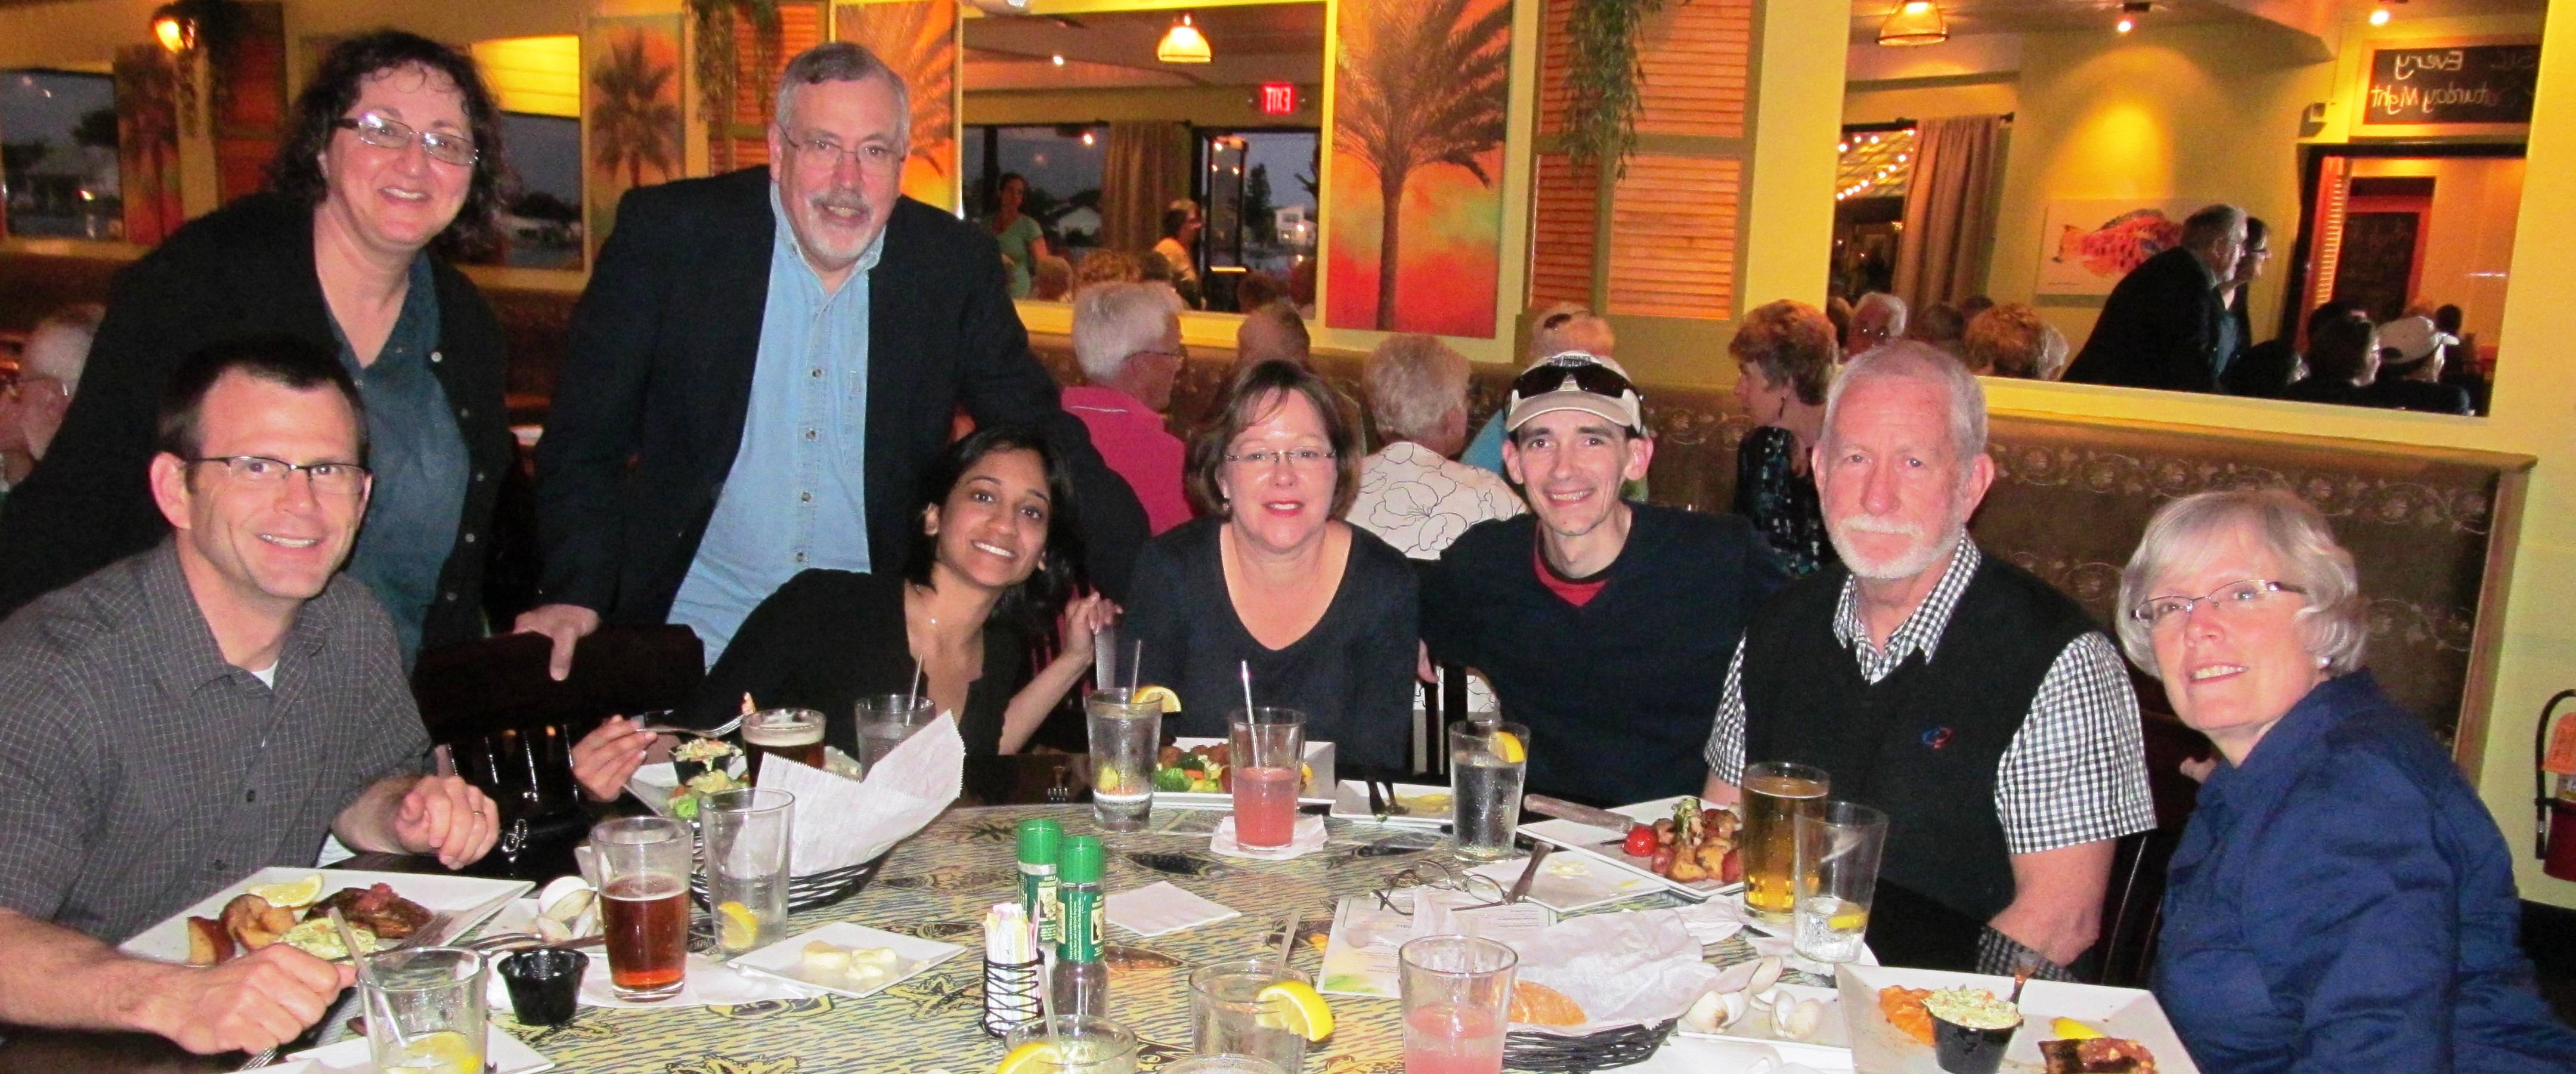 The FMLT takes some personal time to hang out over dinner: Carrie Bare, Elsy Thayil-Blanchard, Doug Jackson, Kim Huey, Tom Grosh, Craig Gartland, Howard Van Cleave, Nancy Thomas, No we don't work 24/7 ;) 